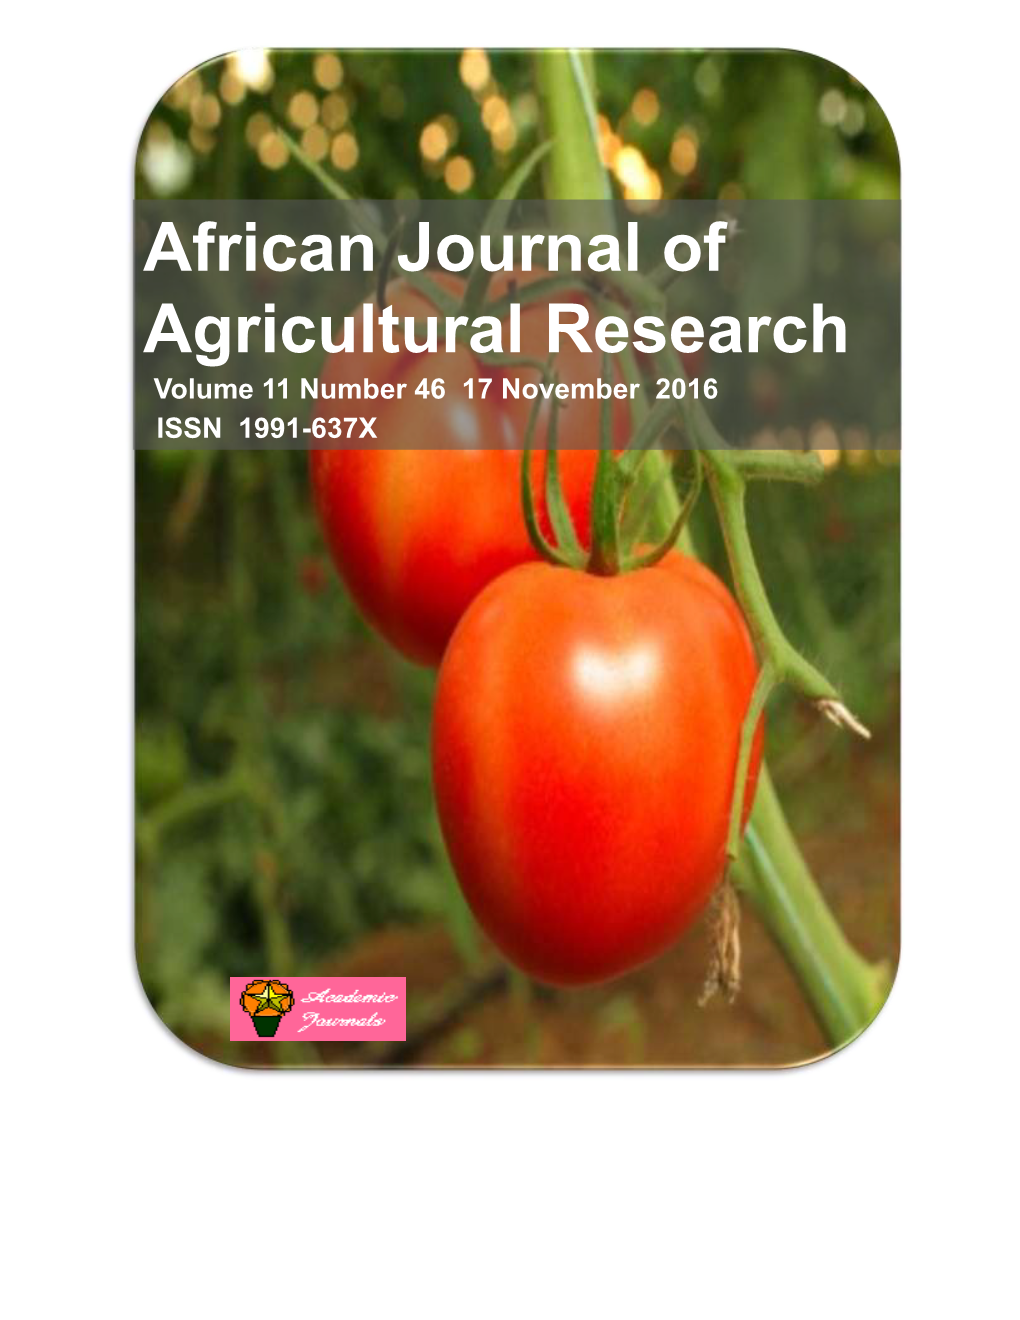 Why Is Adoption of Agroforestry Stymied in Zambia? Perspectives from the Ground-Up 4704 Gillian Kabwe, Hugh Bigsby and Ross Cullen